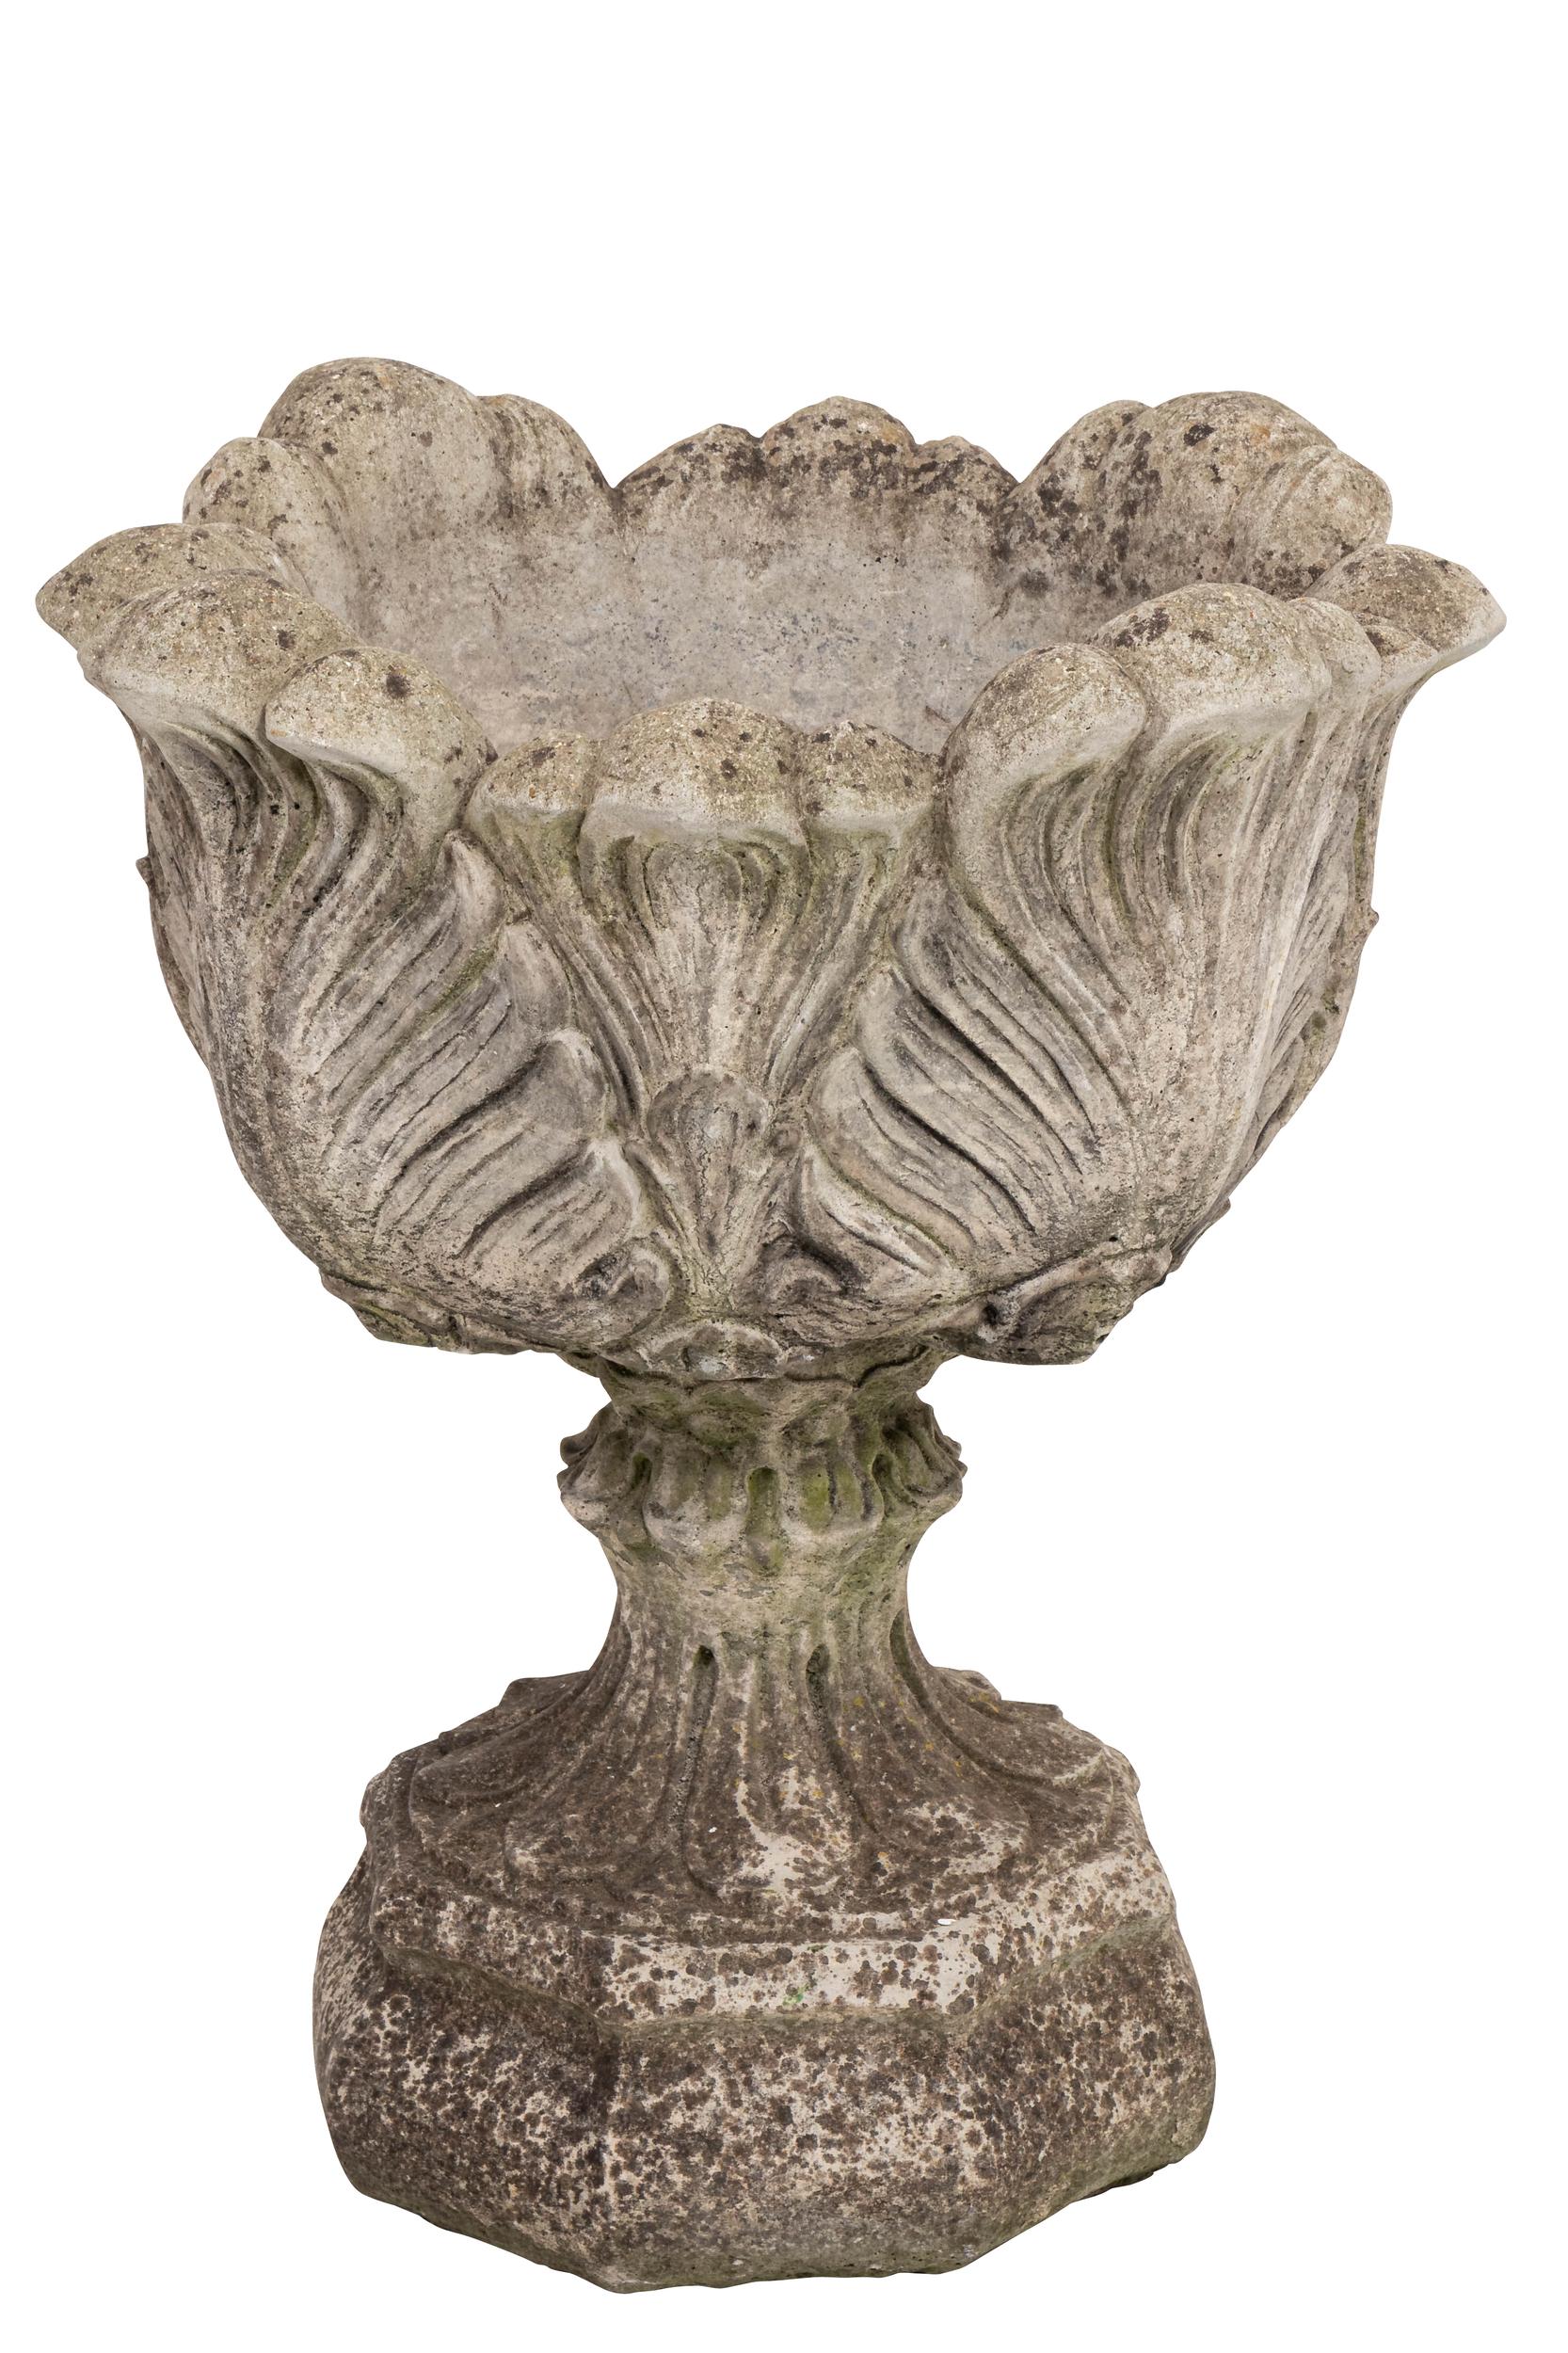 Beautifully designed cast stone acanthus leaf planters on stands. Some patina and in good condition.